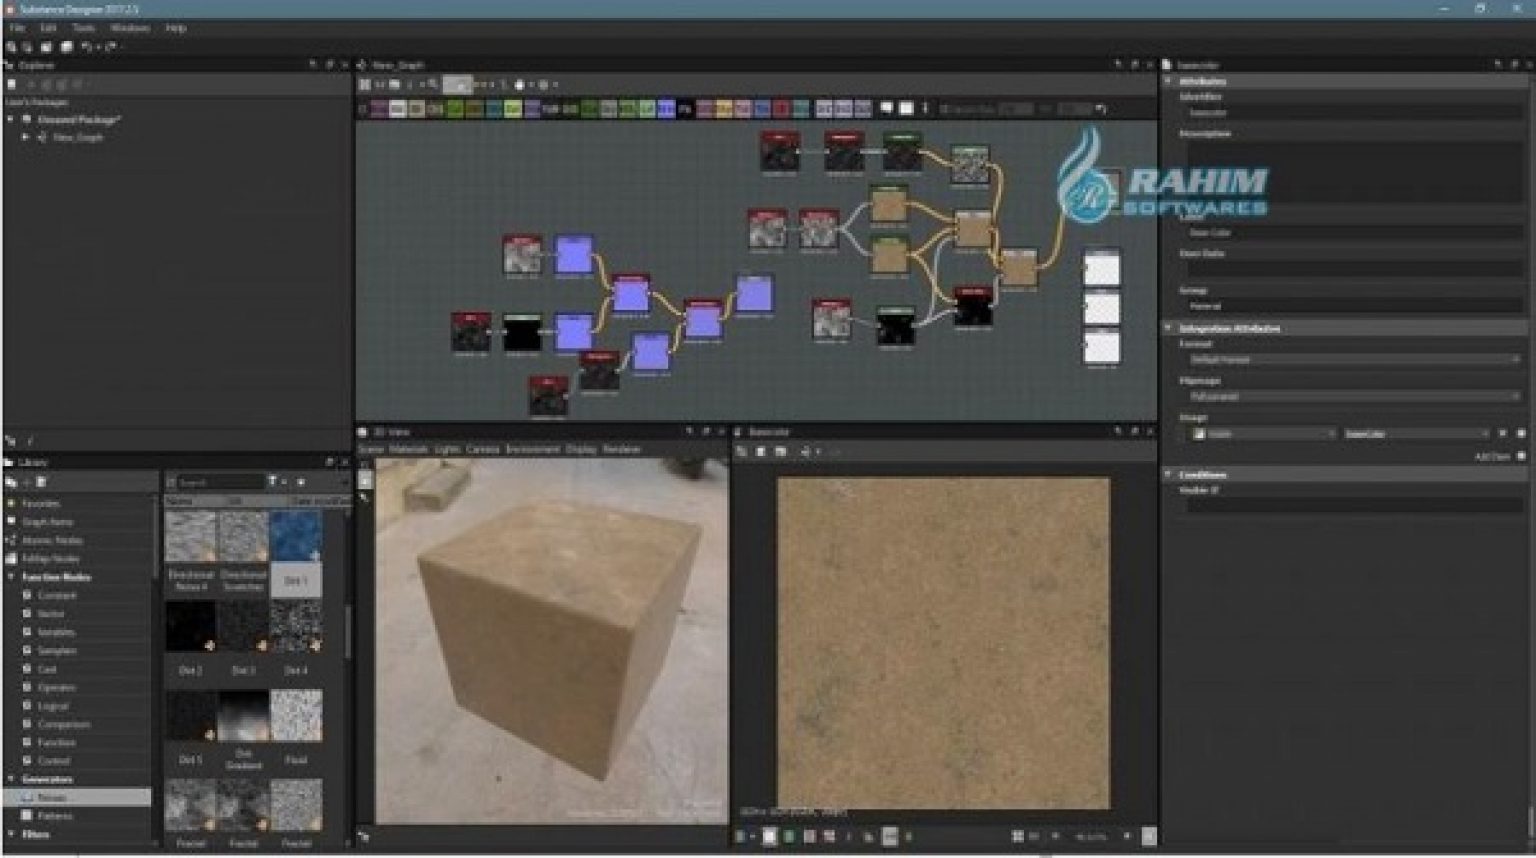 Adobe Substance 3D Stager 2.1.0.5587 free download